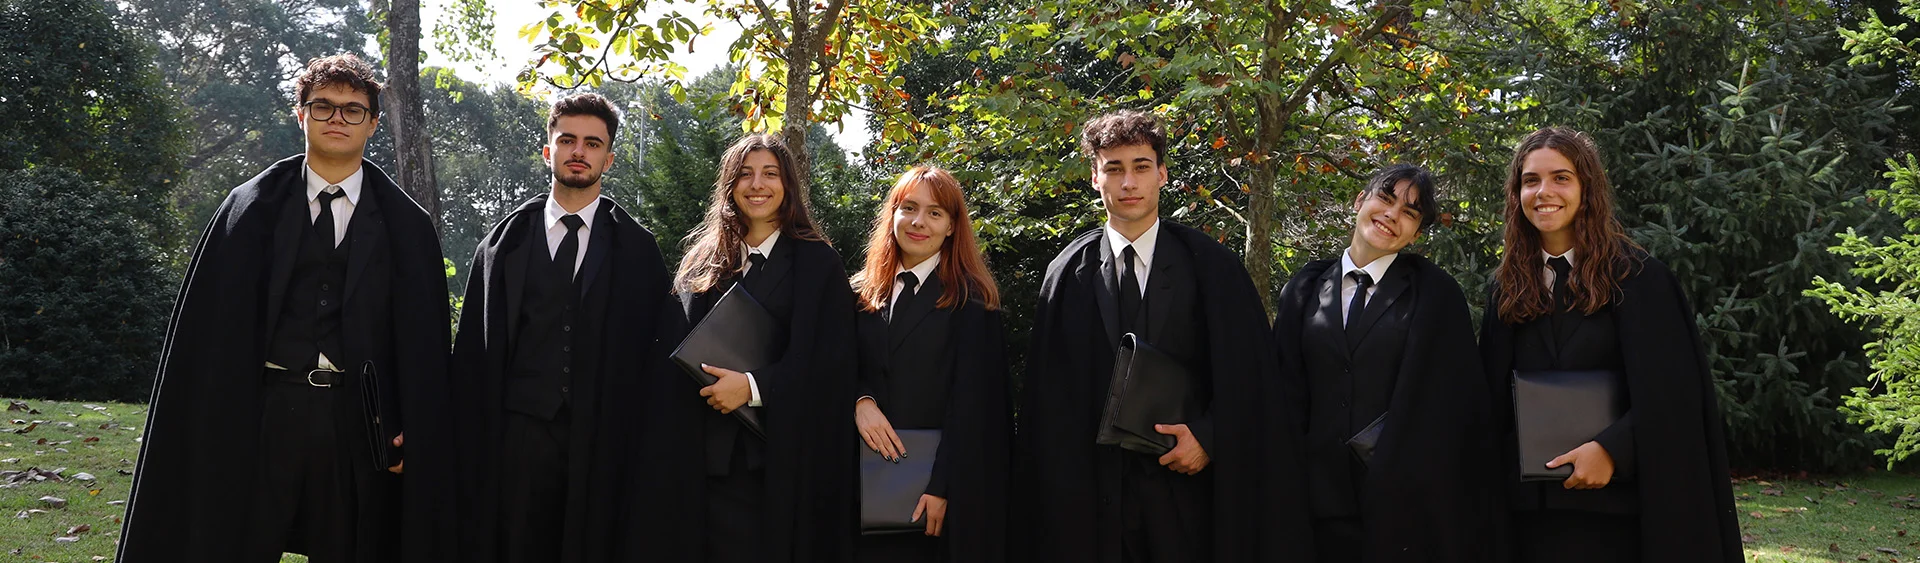 Costumed students from the Faculty of Sciences of the University of Porto